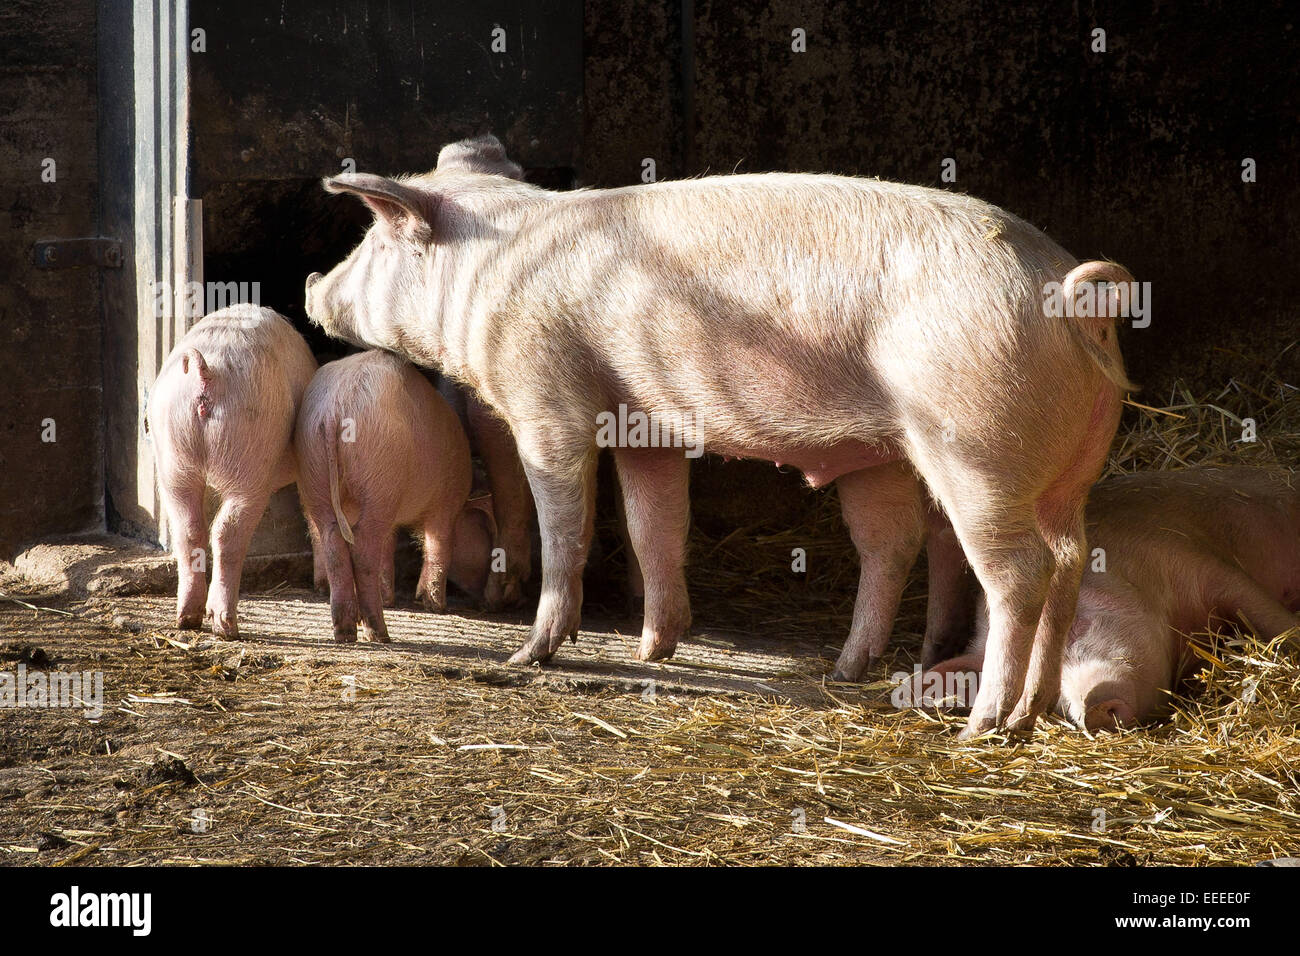 Pigs in an open-air stable, Winnenden, Germany, Jan. 1, 2015. Stock Photo